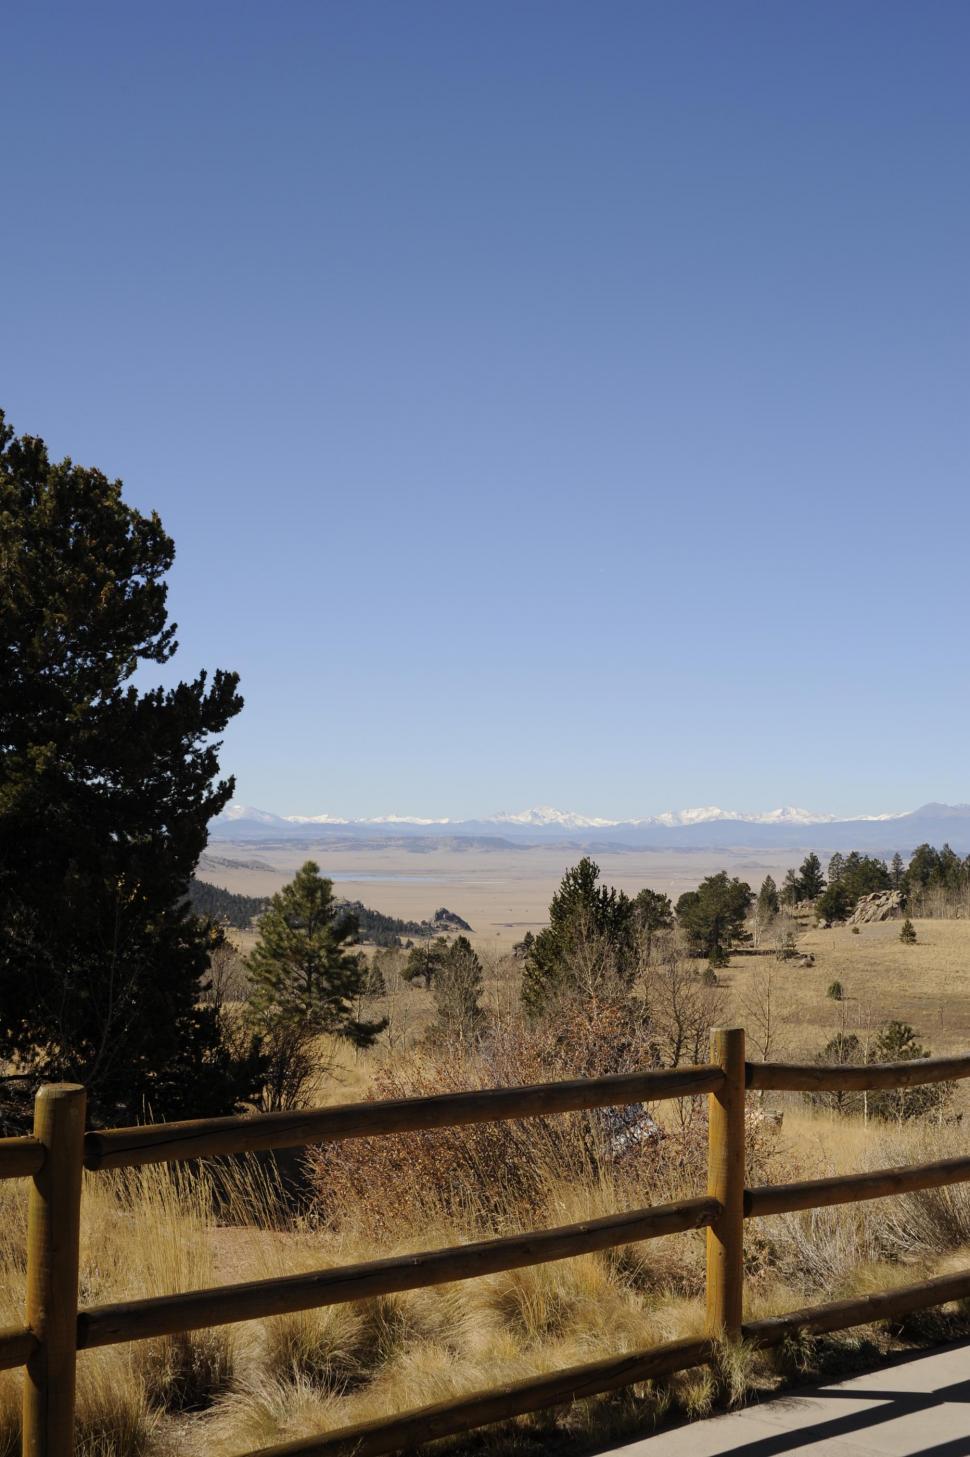 Free Image of View of Fence overlooking valley 